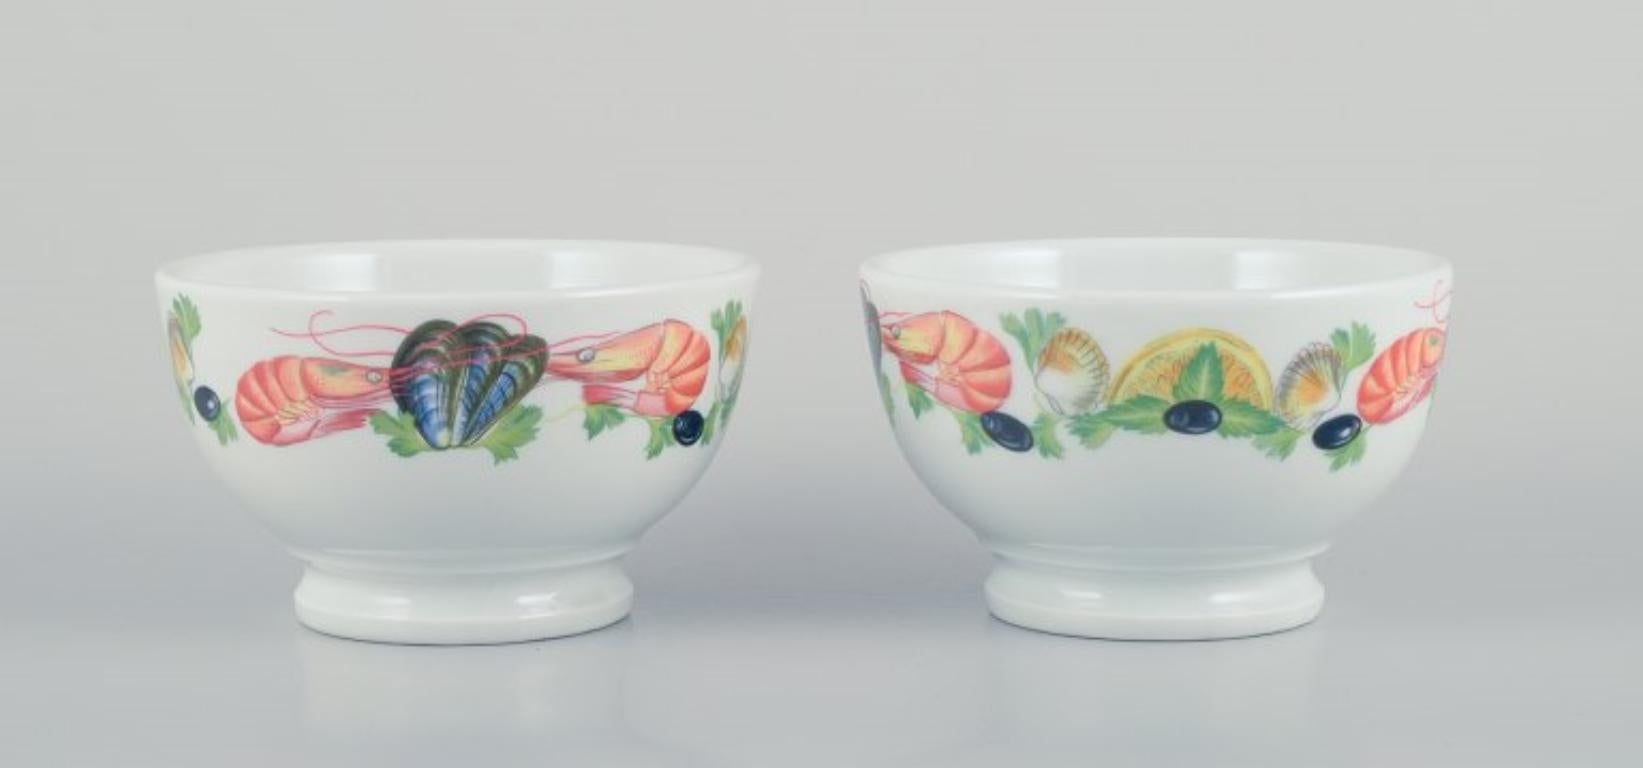 Pillivuyt, France, a set of two porcelain bowls with seafood motif.
Dating from the 1970s.
Marked.
In perfect condition.
Dimensions: Diameter 13.0 cm x Height 7.8 cm.